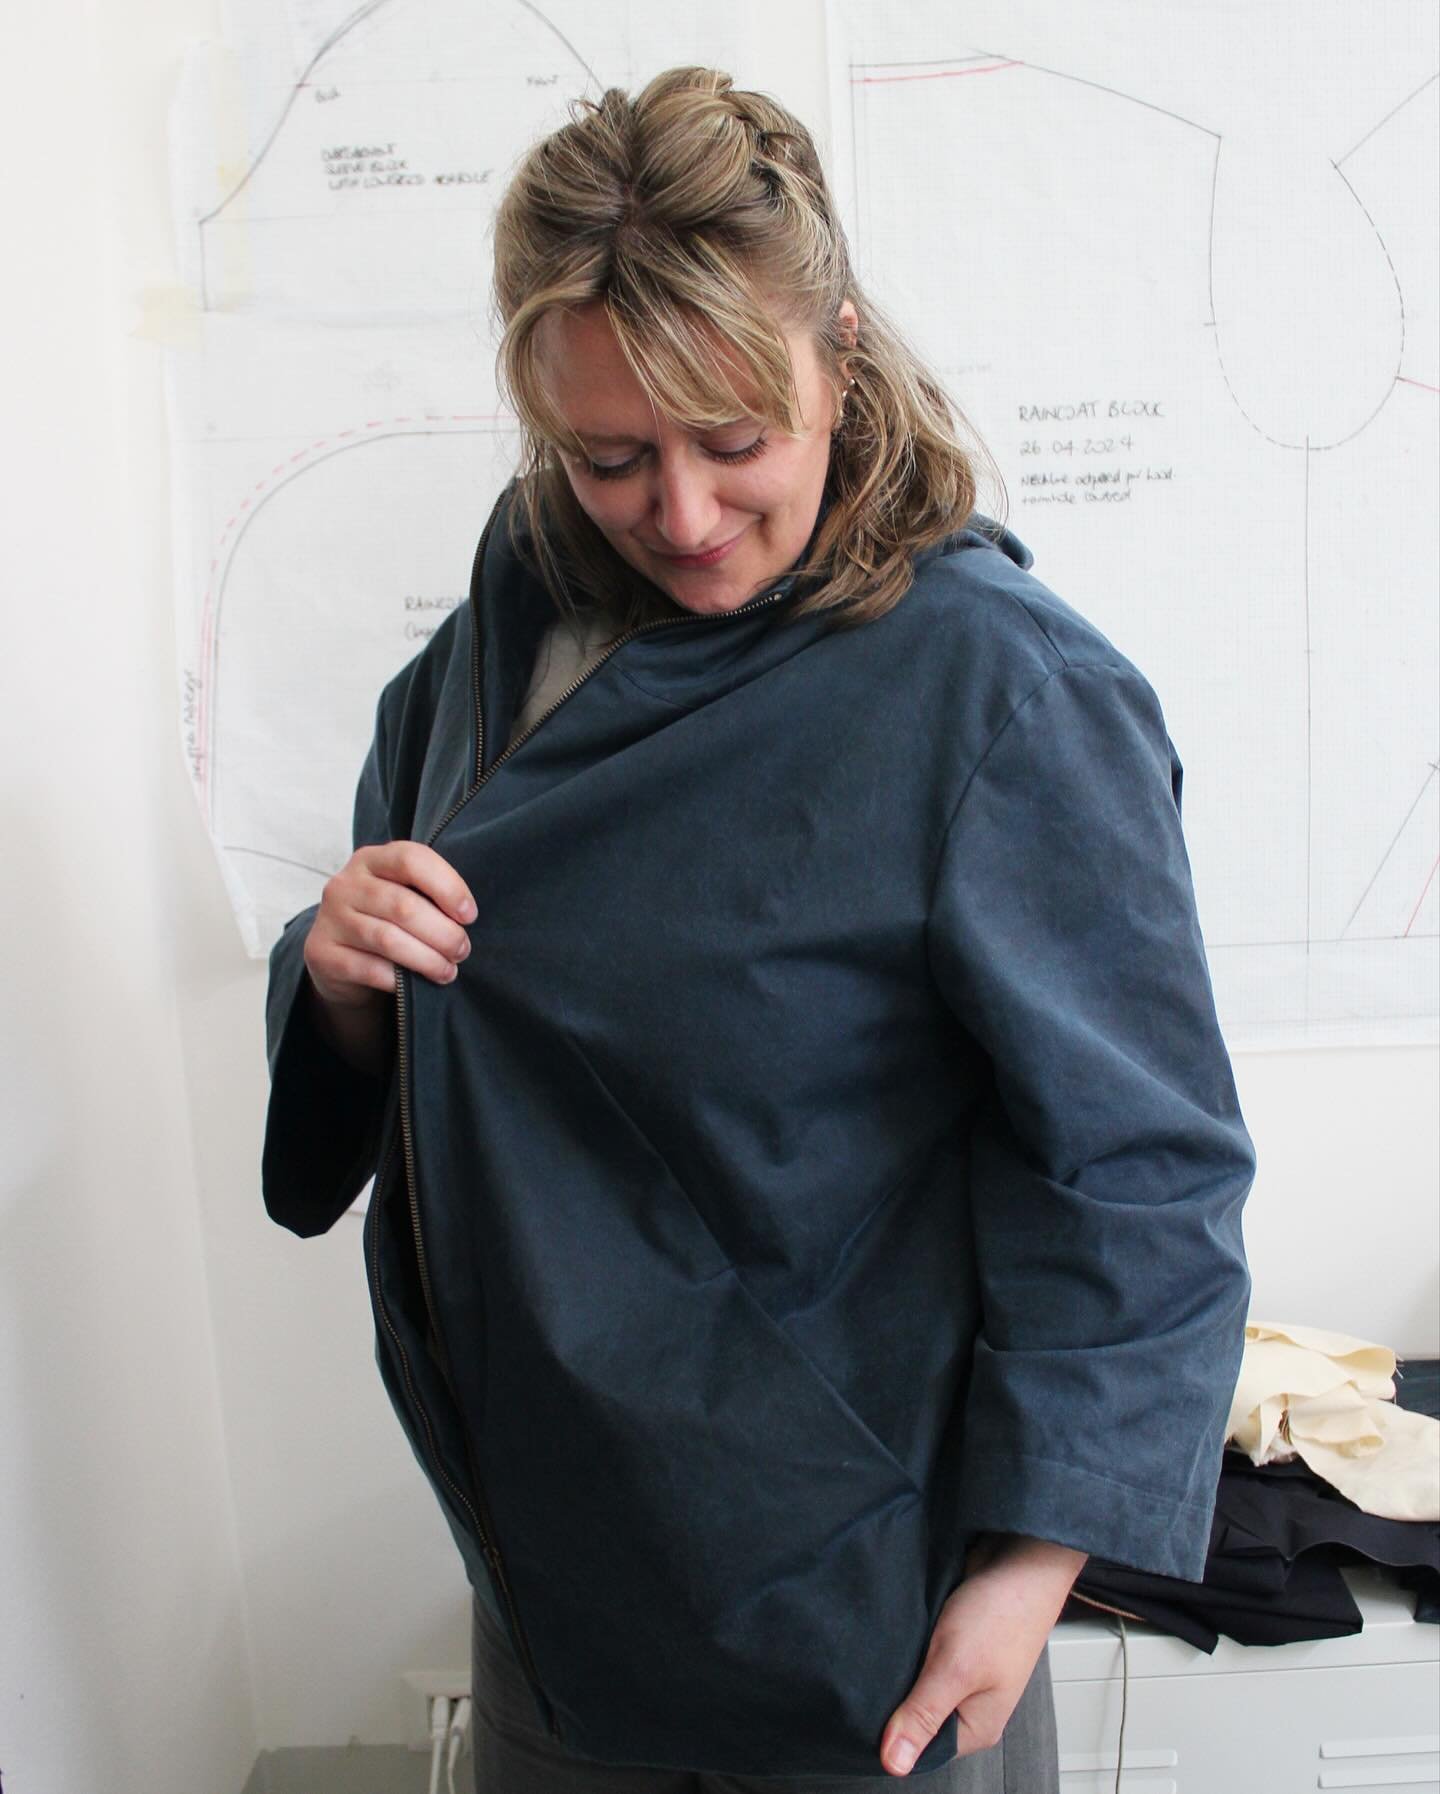 We&rsquo;re excited to introduce you our current designer in residence: Maureen Selina Laverty! ⭐️ @maureenselinalaverty 

Maureen is a fashion designer and action researcher from Northern Ireland but based in Norway, specialised in inclusive sensory